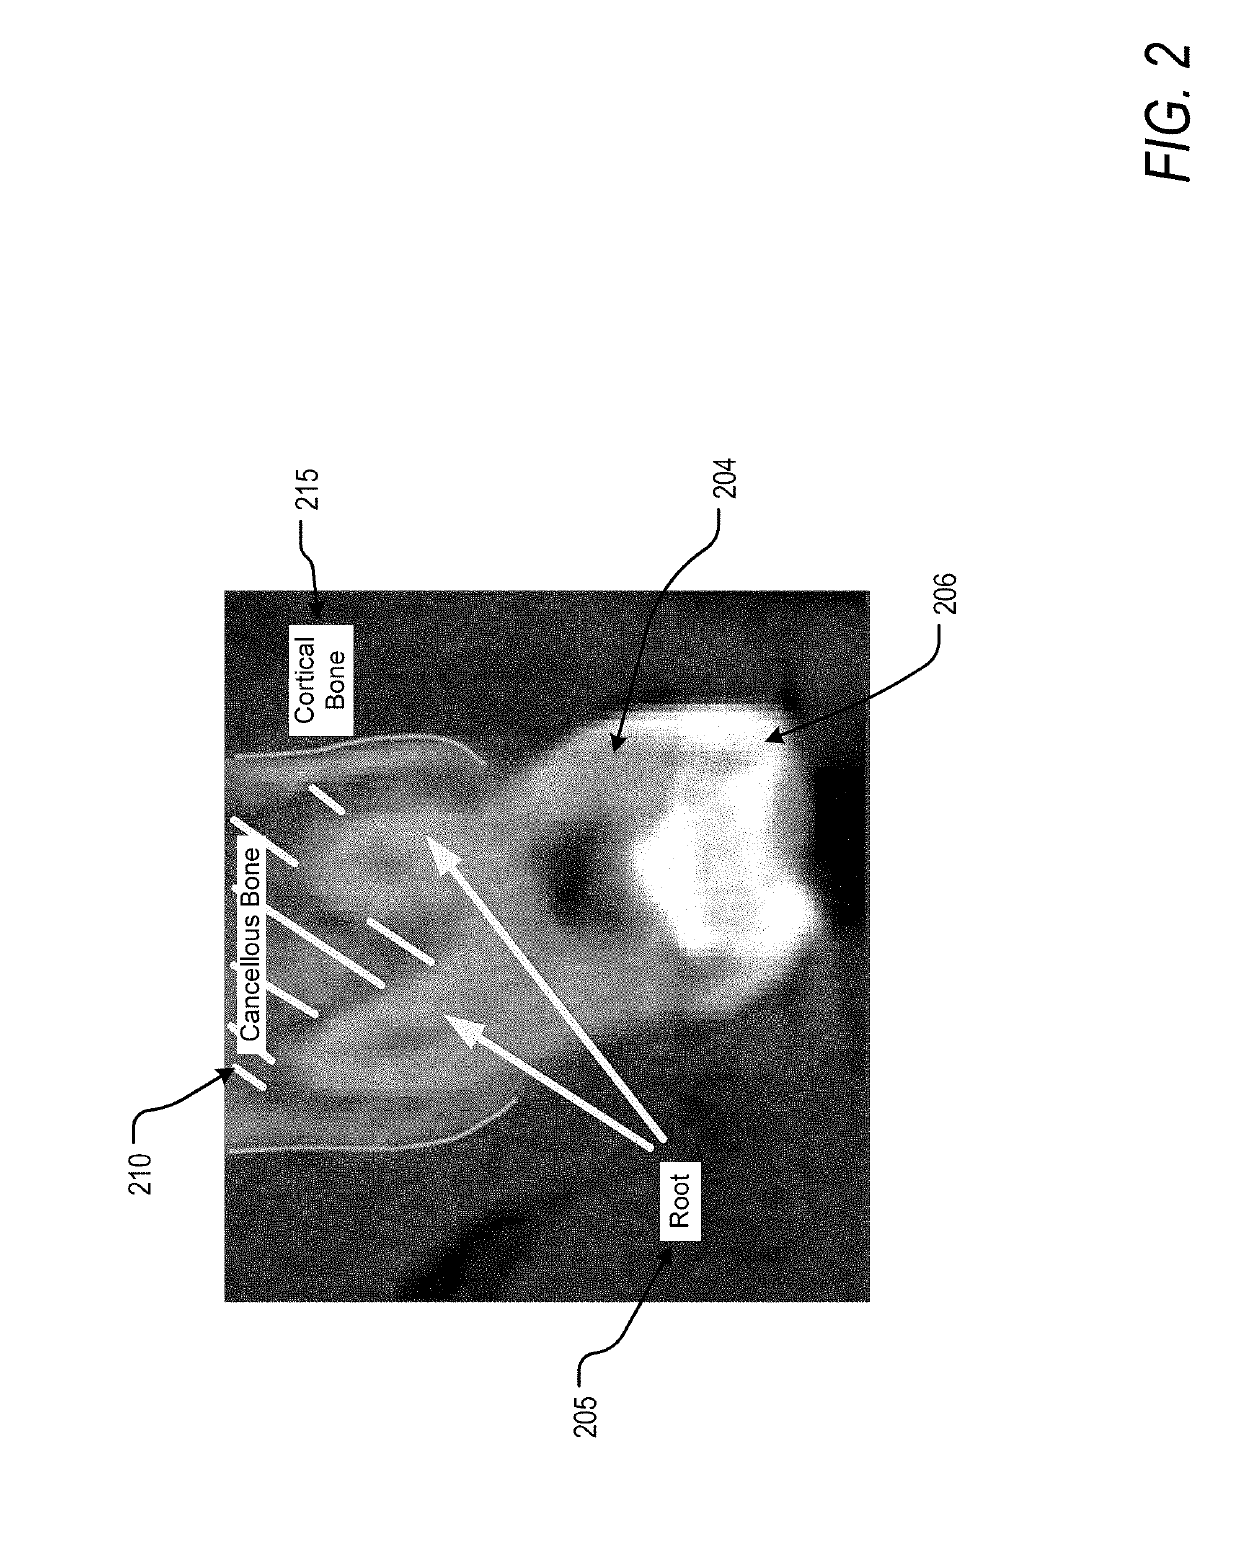 Method and system of teeth alignment based on simulating of crown and root movement